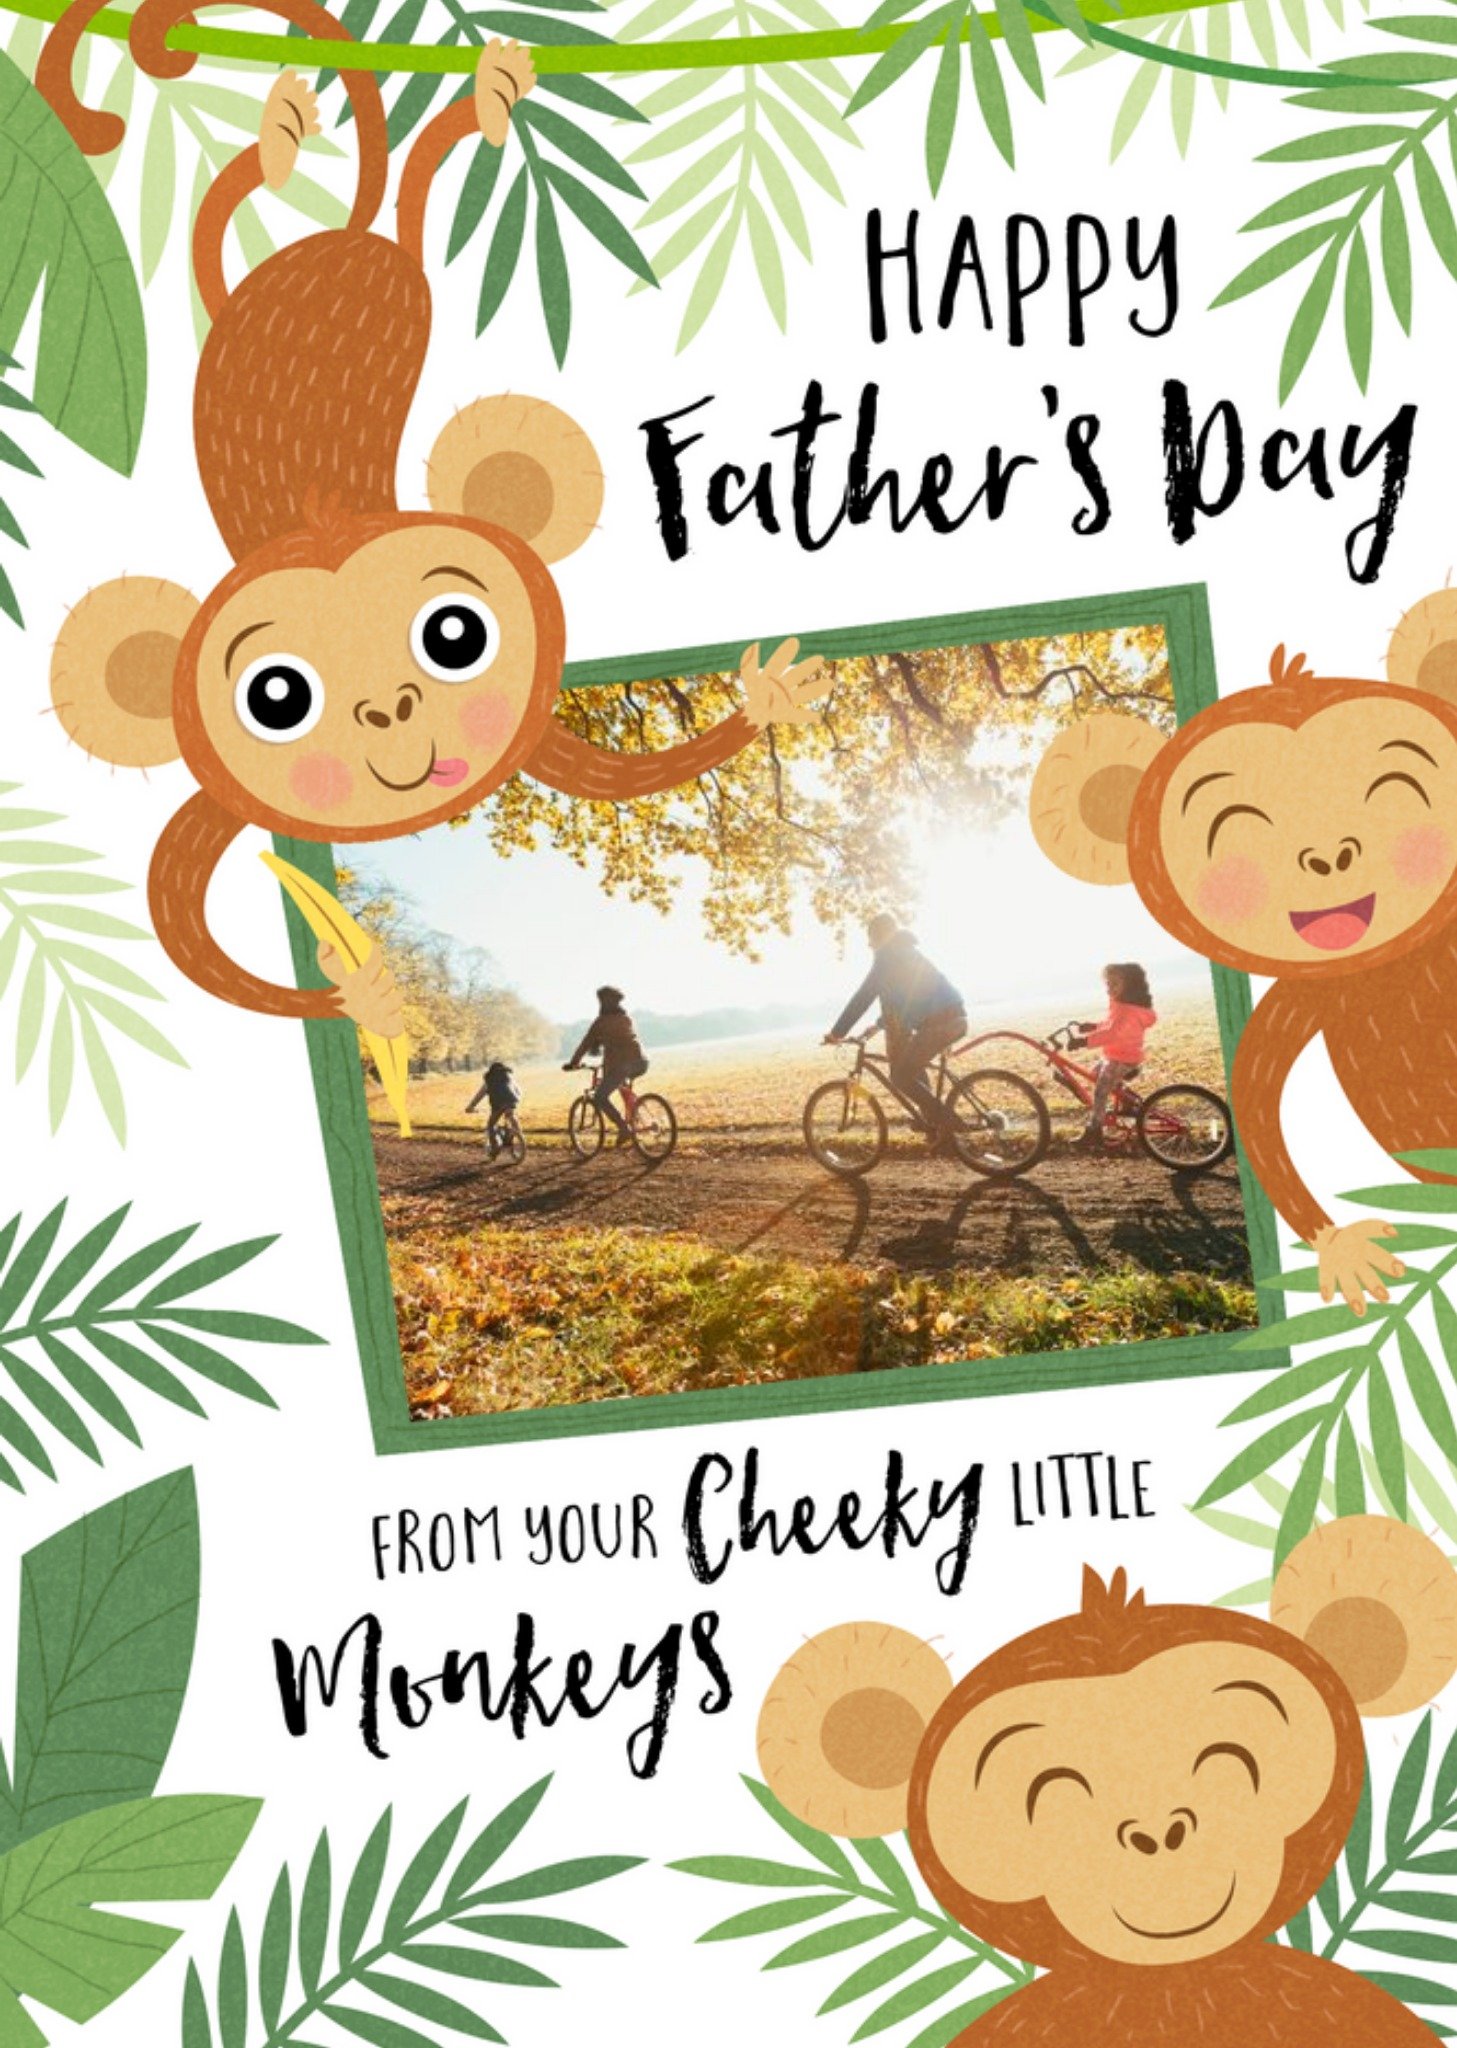 Moonpig Cute From Your Cheeky Little Monkeys Photo Upload Father's Day Card, Large